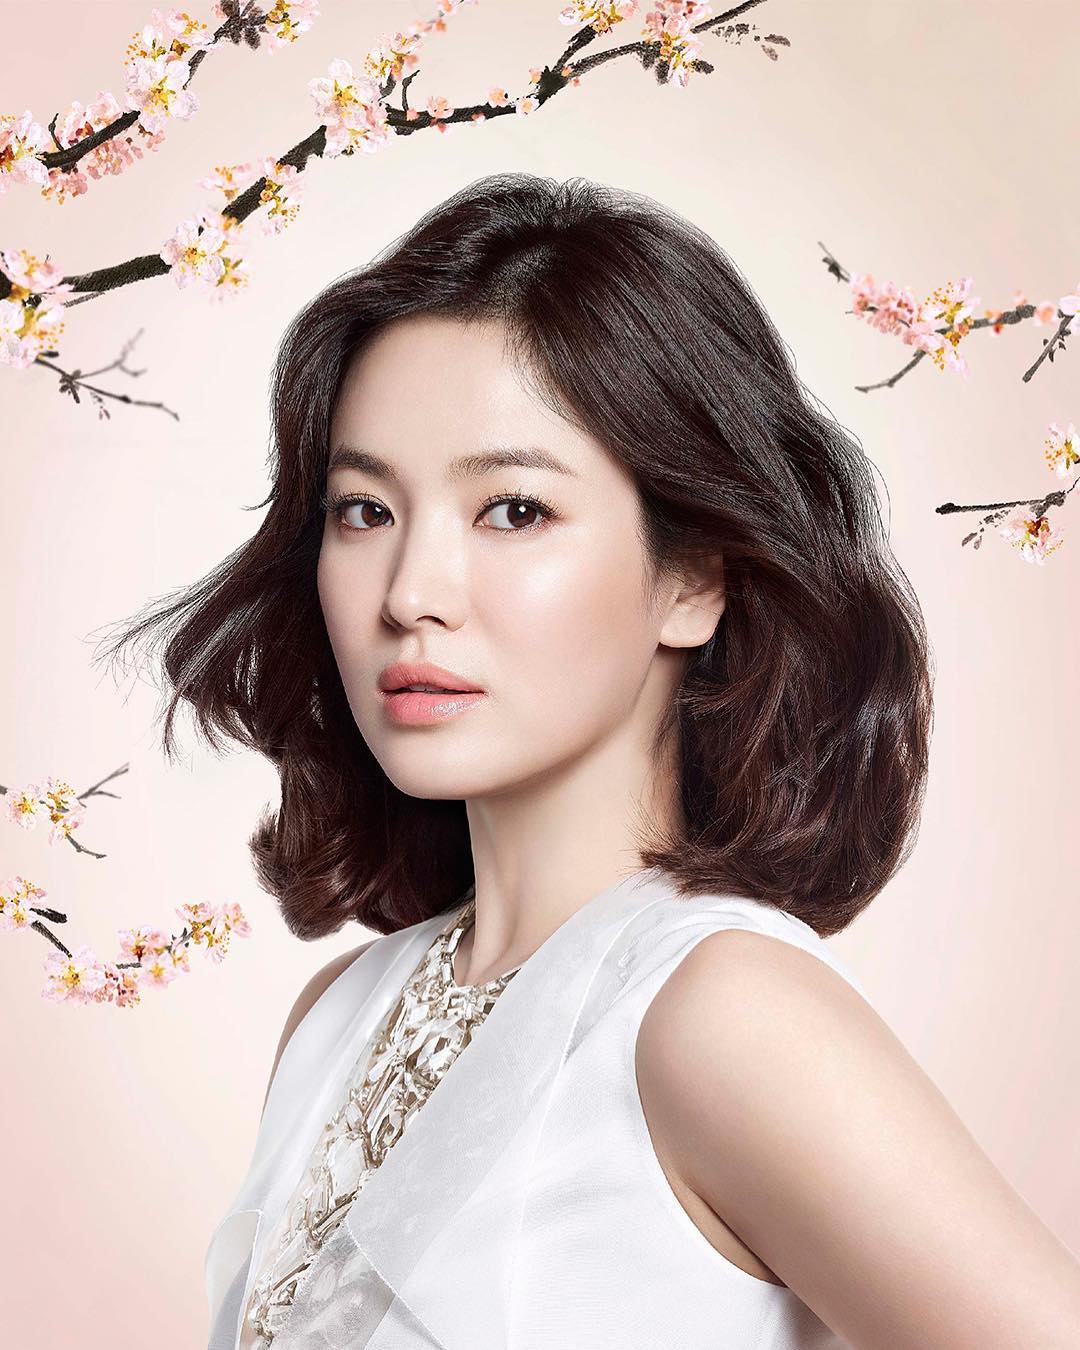 Song Hye Kyo's Beauty is Out Of This World, I Swear! - KPop News